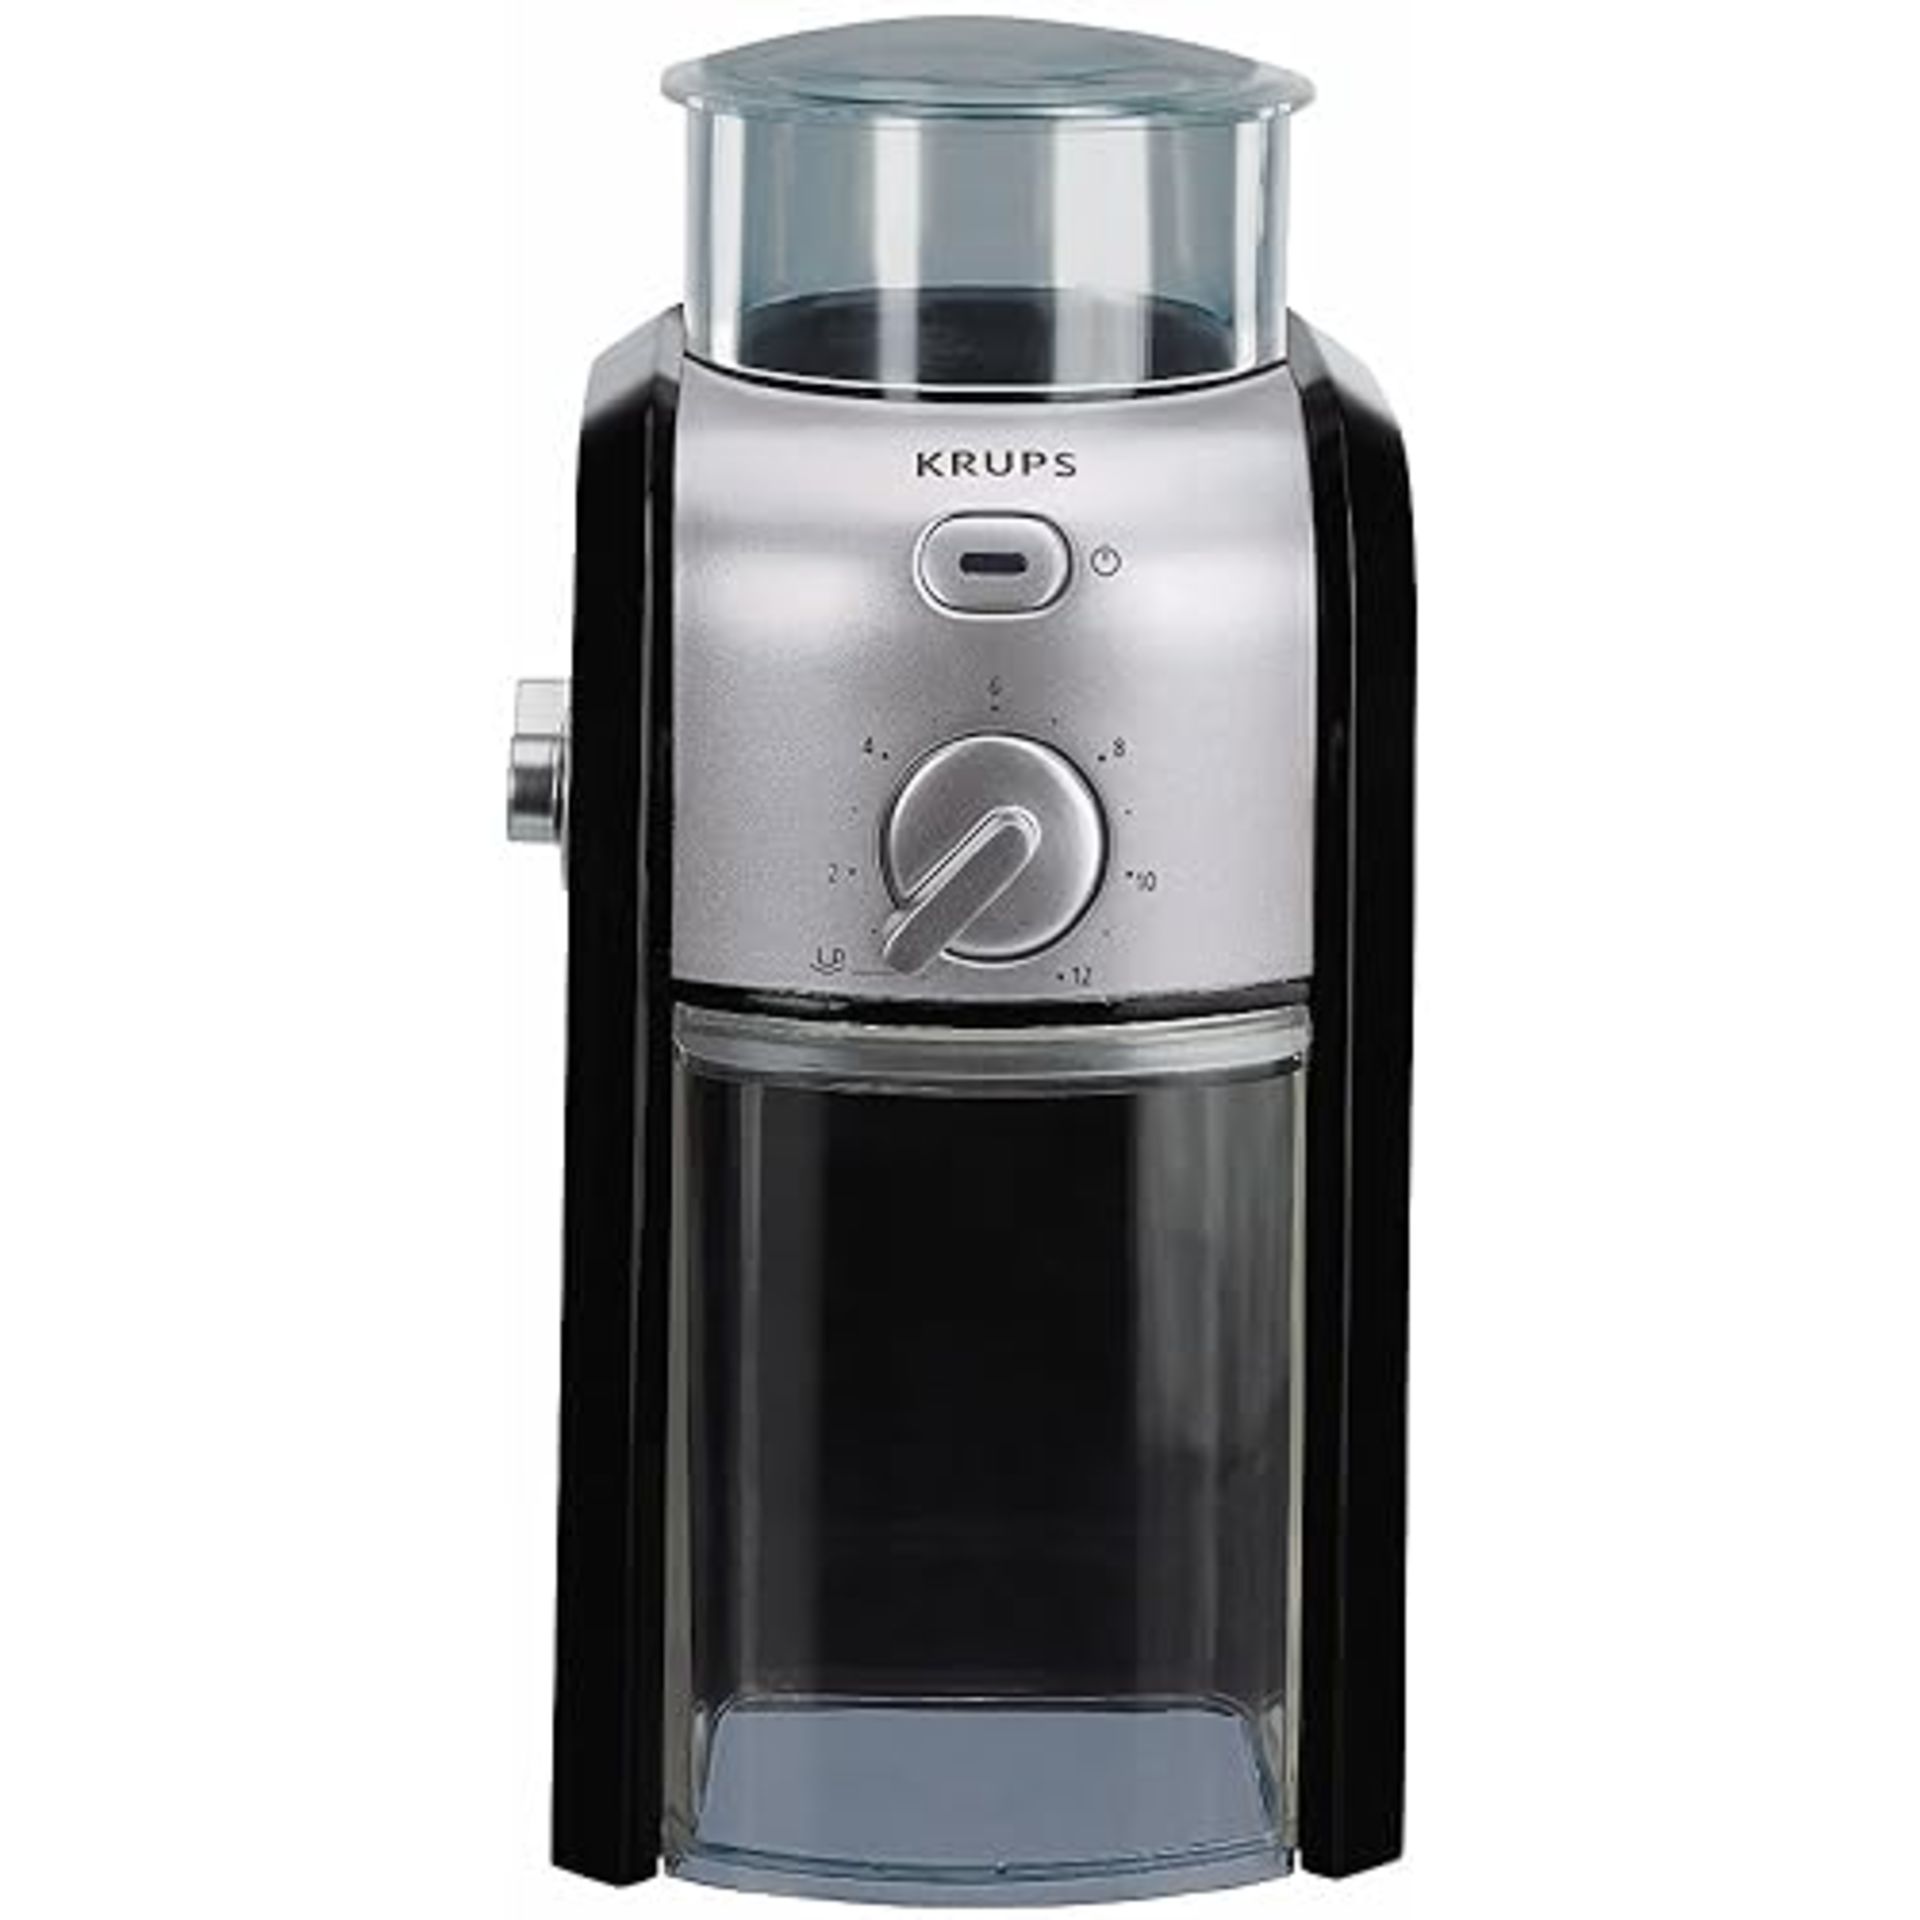 Krups Expert Burr, Automatic Coffee Grinder, Easy Clean, black & silver, GVX231